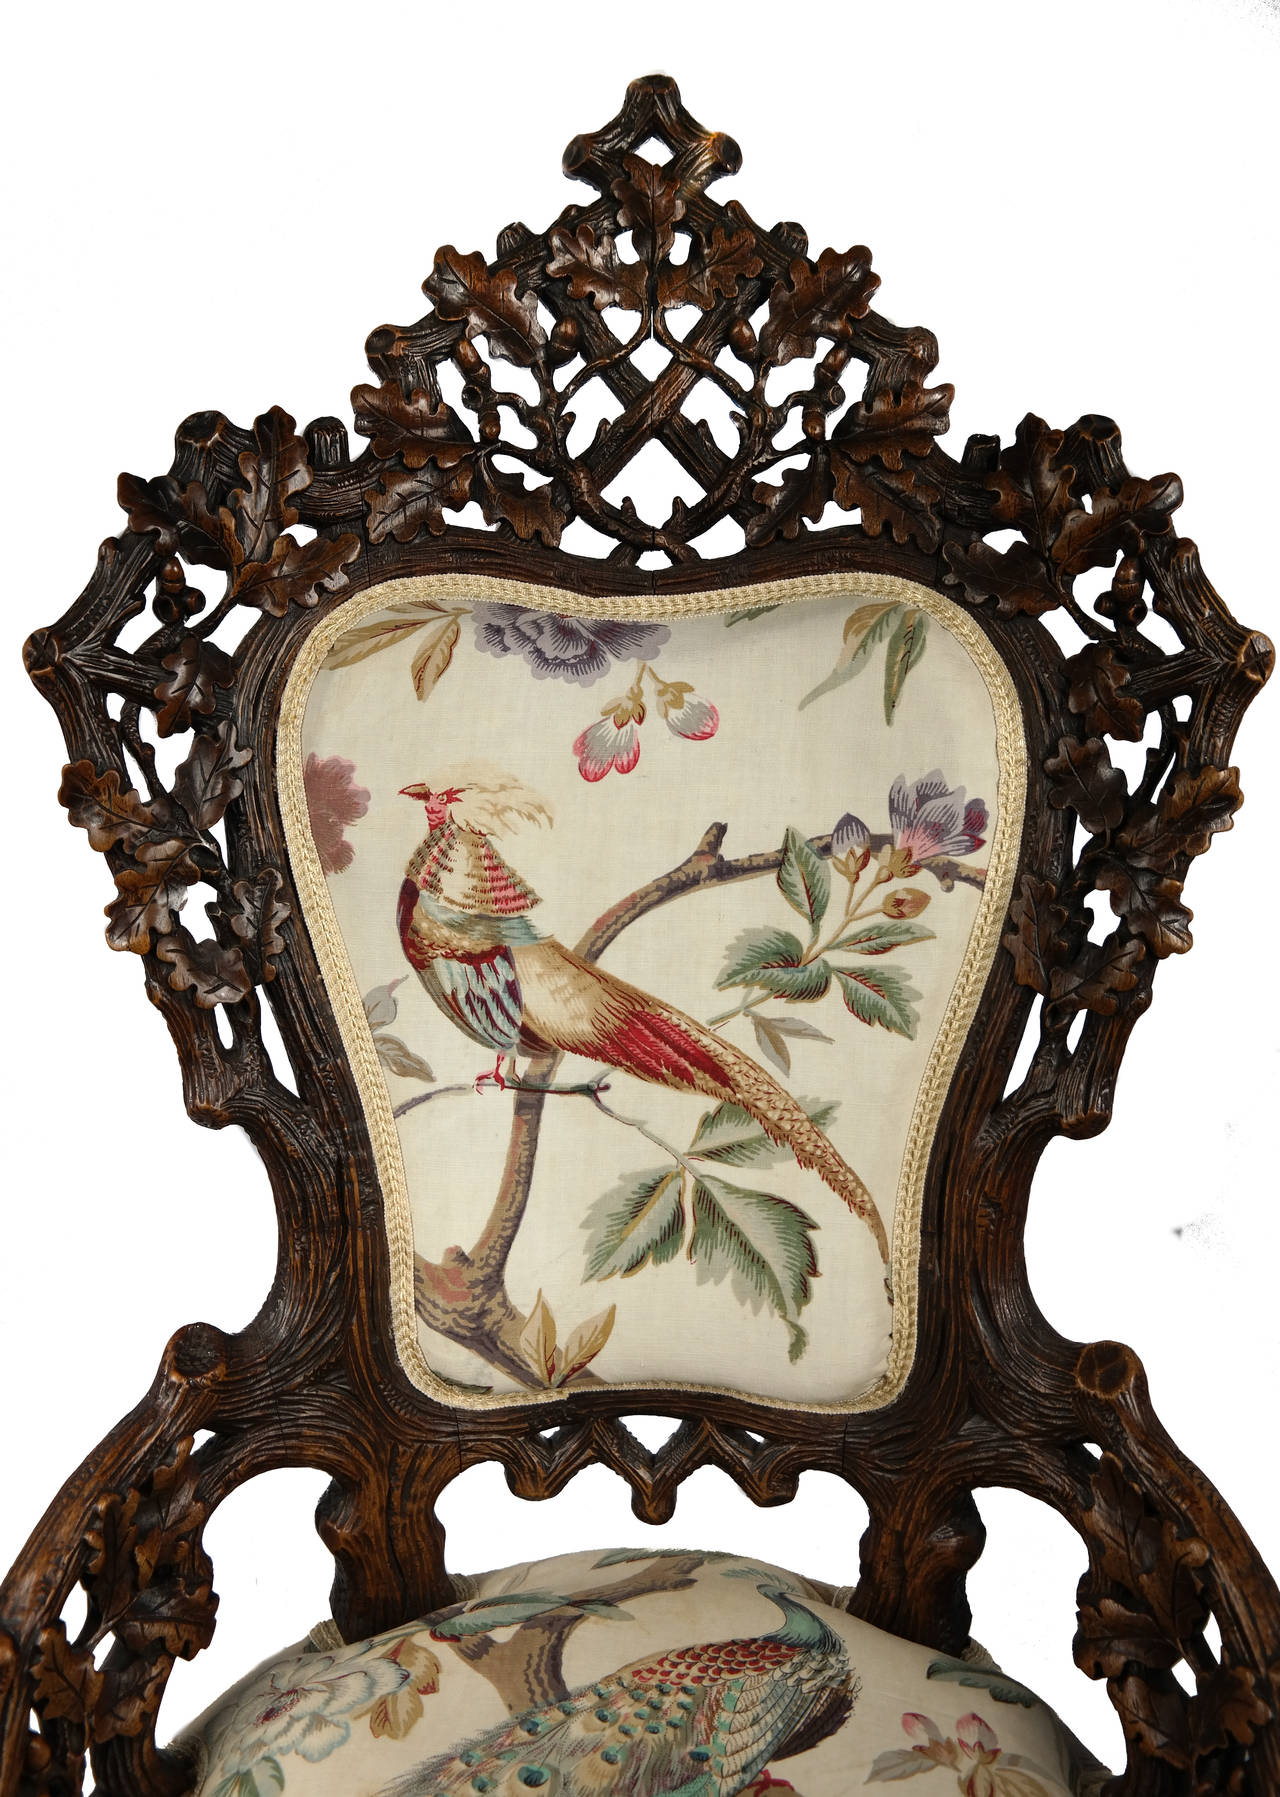 Late 19th Century Black Forest Carved Oak Chair, Swiss circa 1880. Re-upholstered in beautiful hand block printed fabric decorated with pheasants and peacocks. 